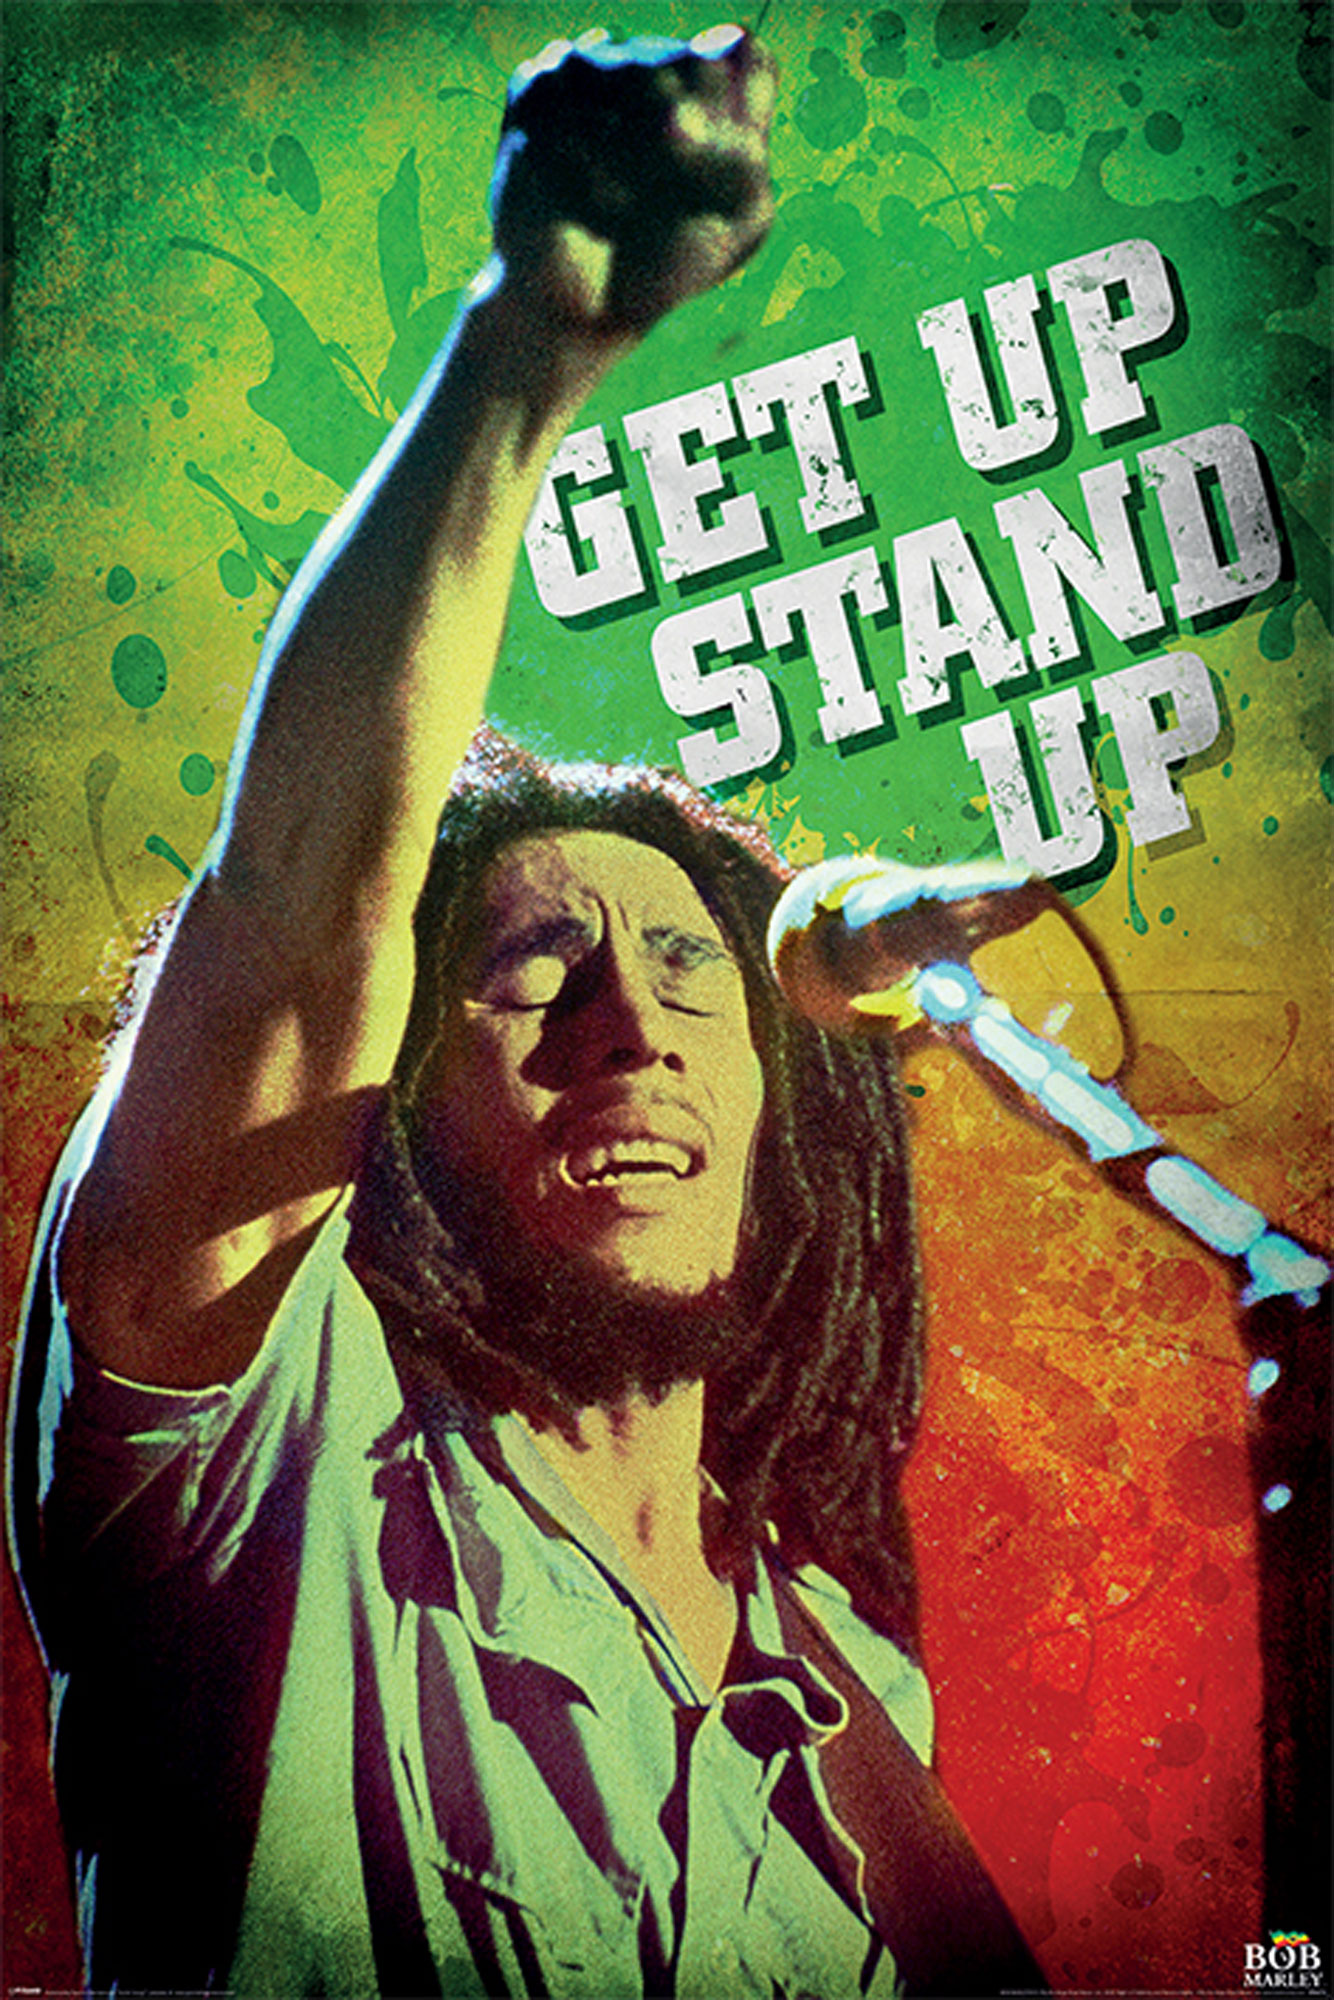 - Marley, Get Bob Up Stand Up